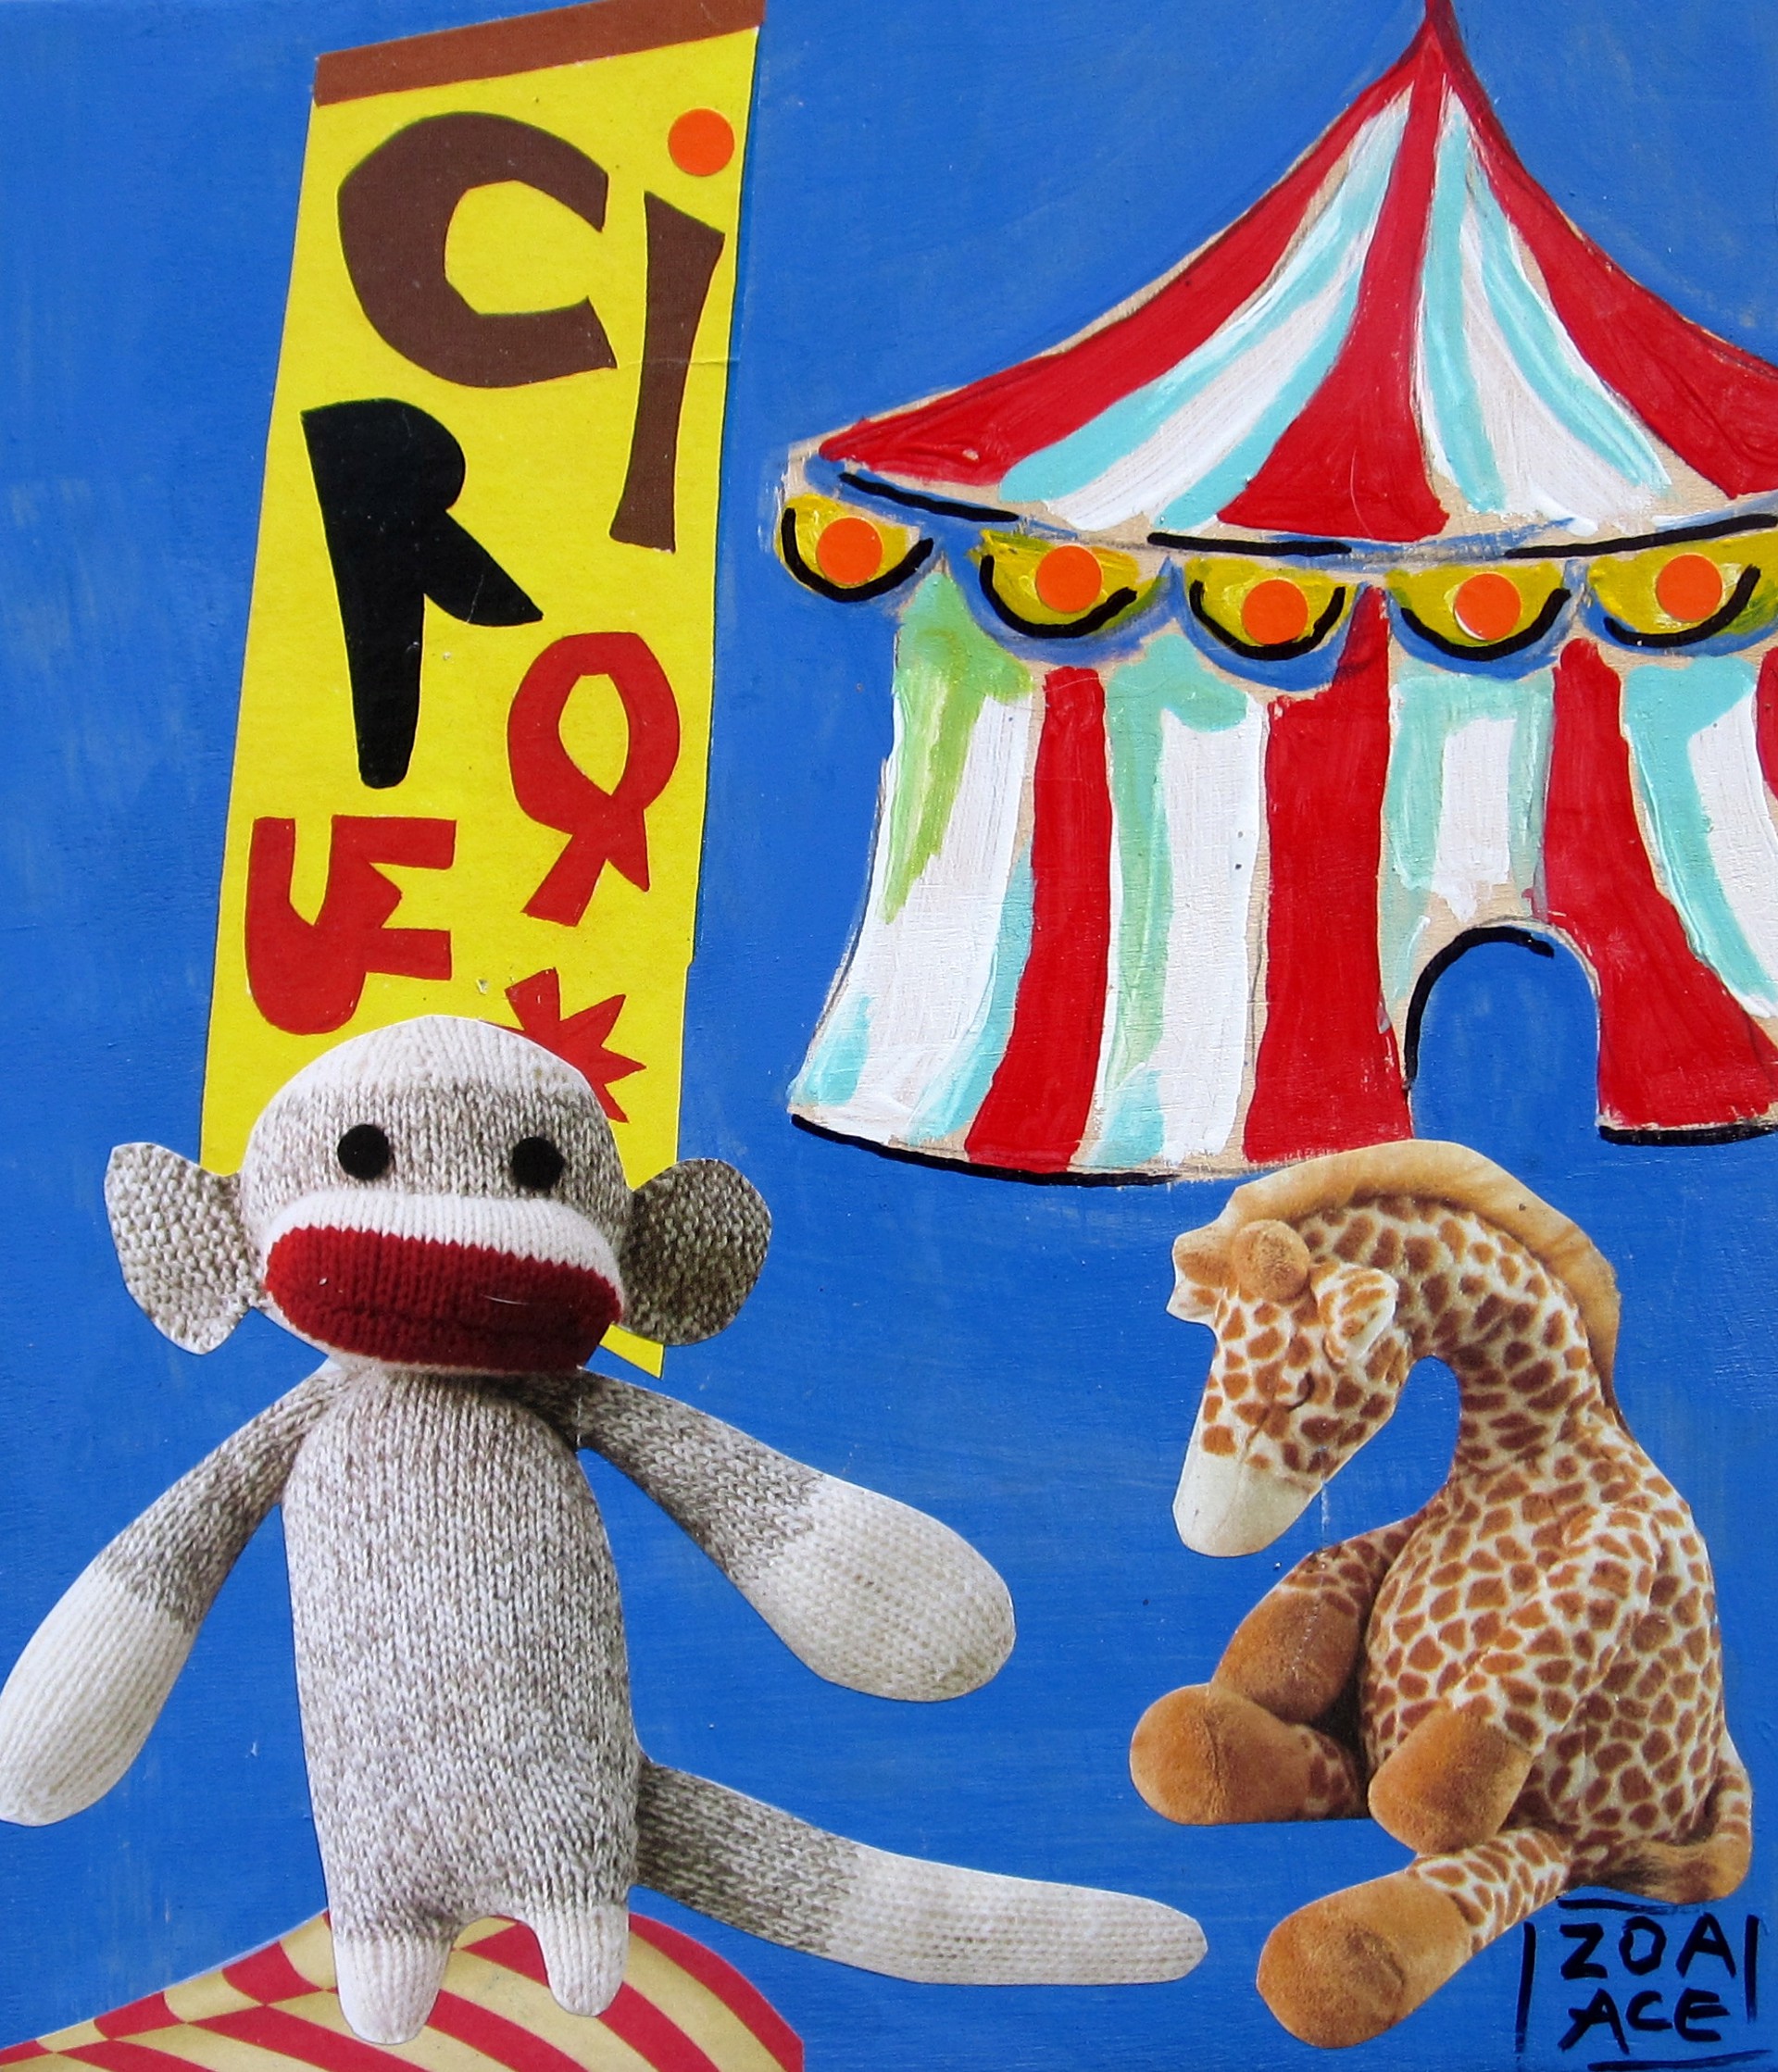 Circus Animals by Zoa Ace